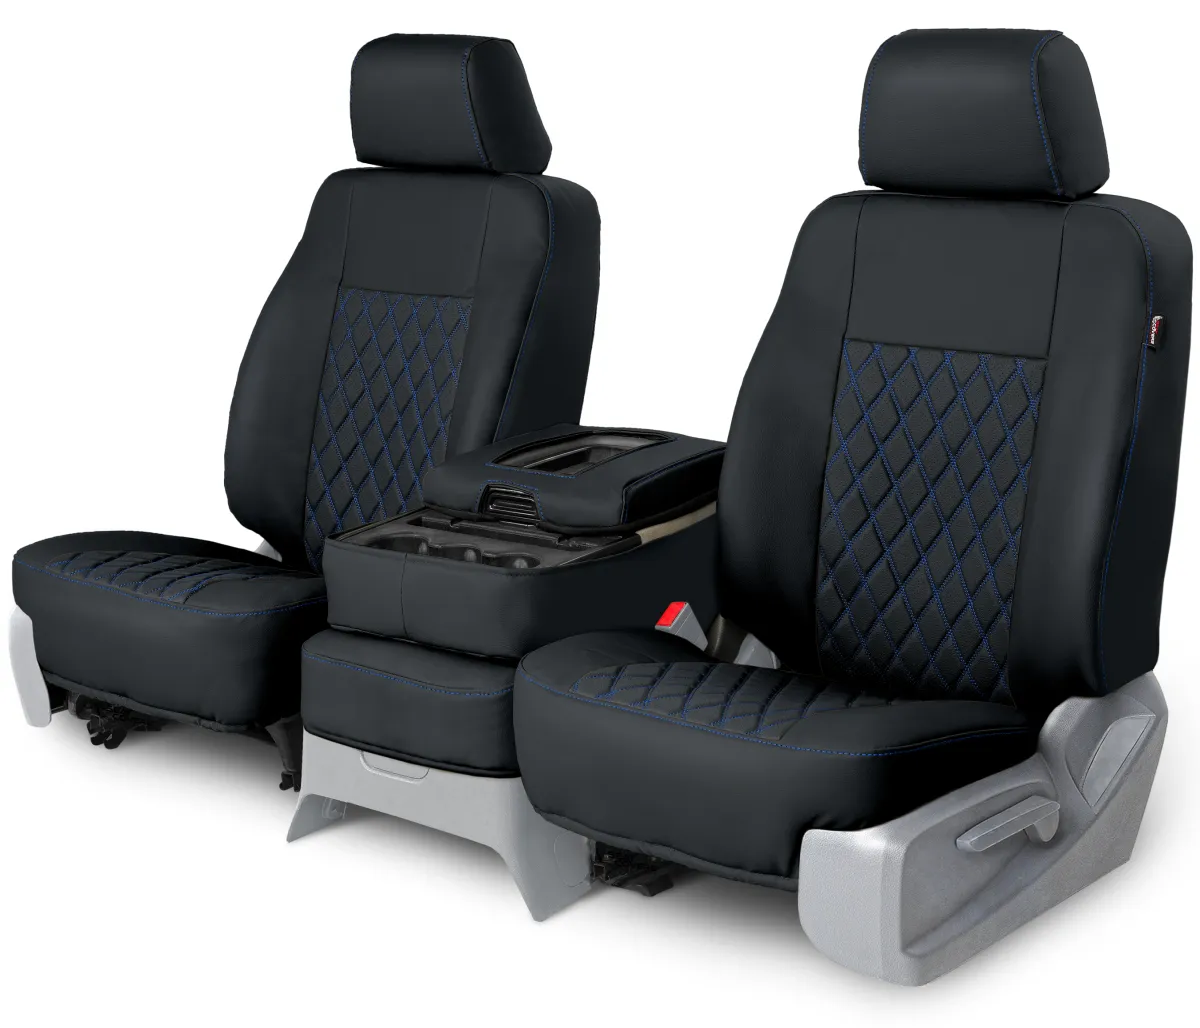 Quilted Leatherette Custom Seat Covers (18 Colors) - Black with Blue Diamond Stitching | Seat Covers Unlimited